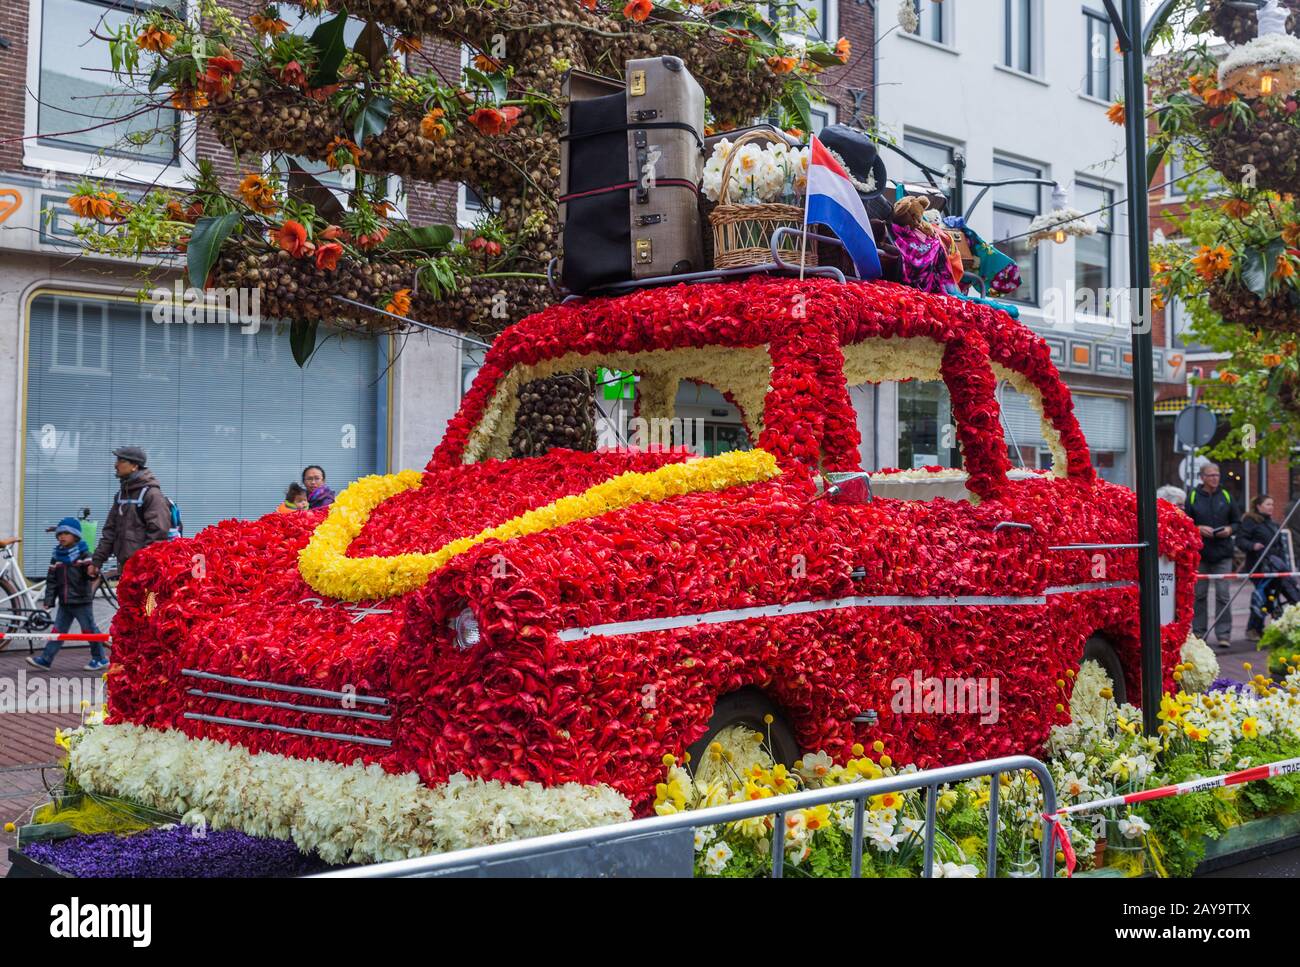 HAARLEM NETHERLANDS - APRIL 23, 2017: Statue made of tulips at flowers parade on April 23, 2017 in Haarlem Netherlands Stock Photo